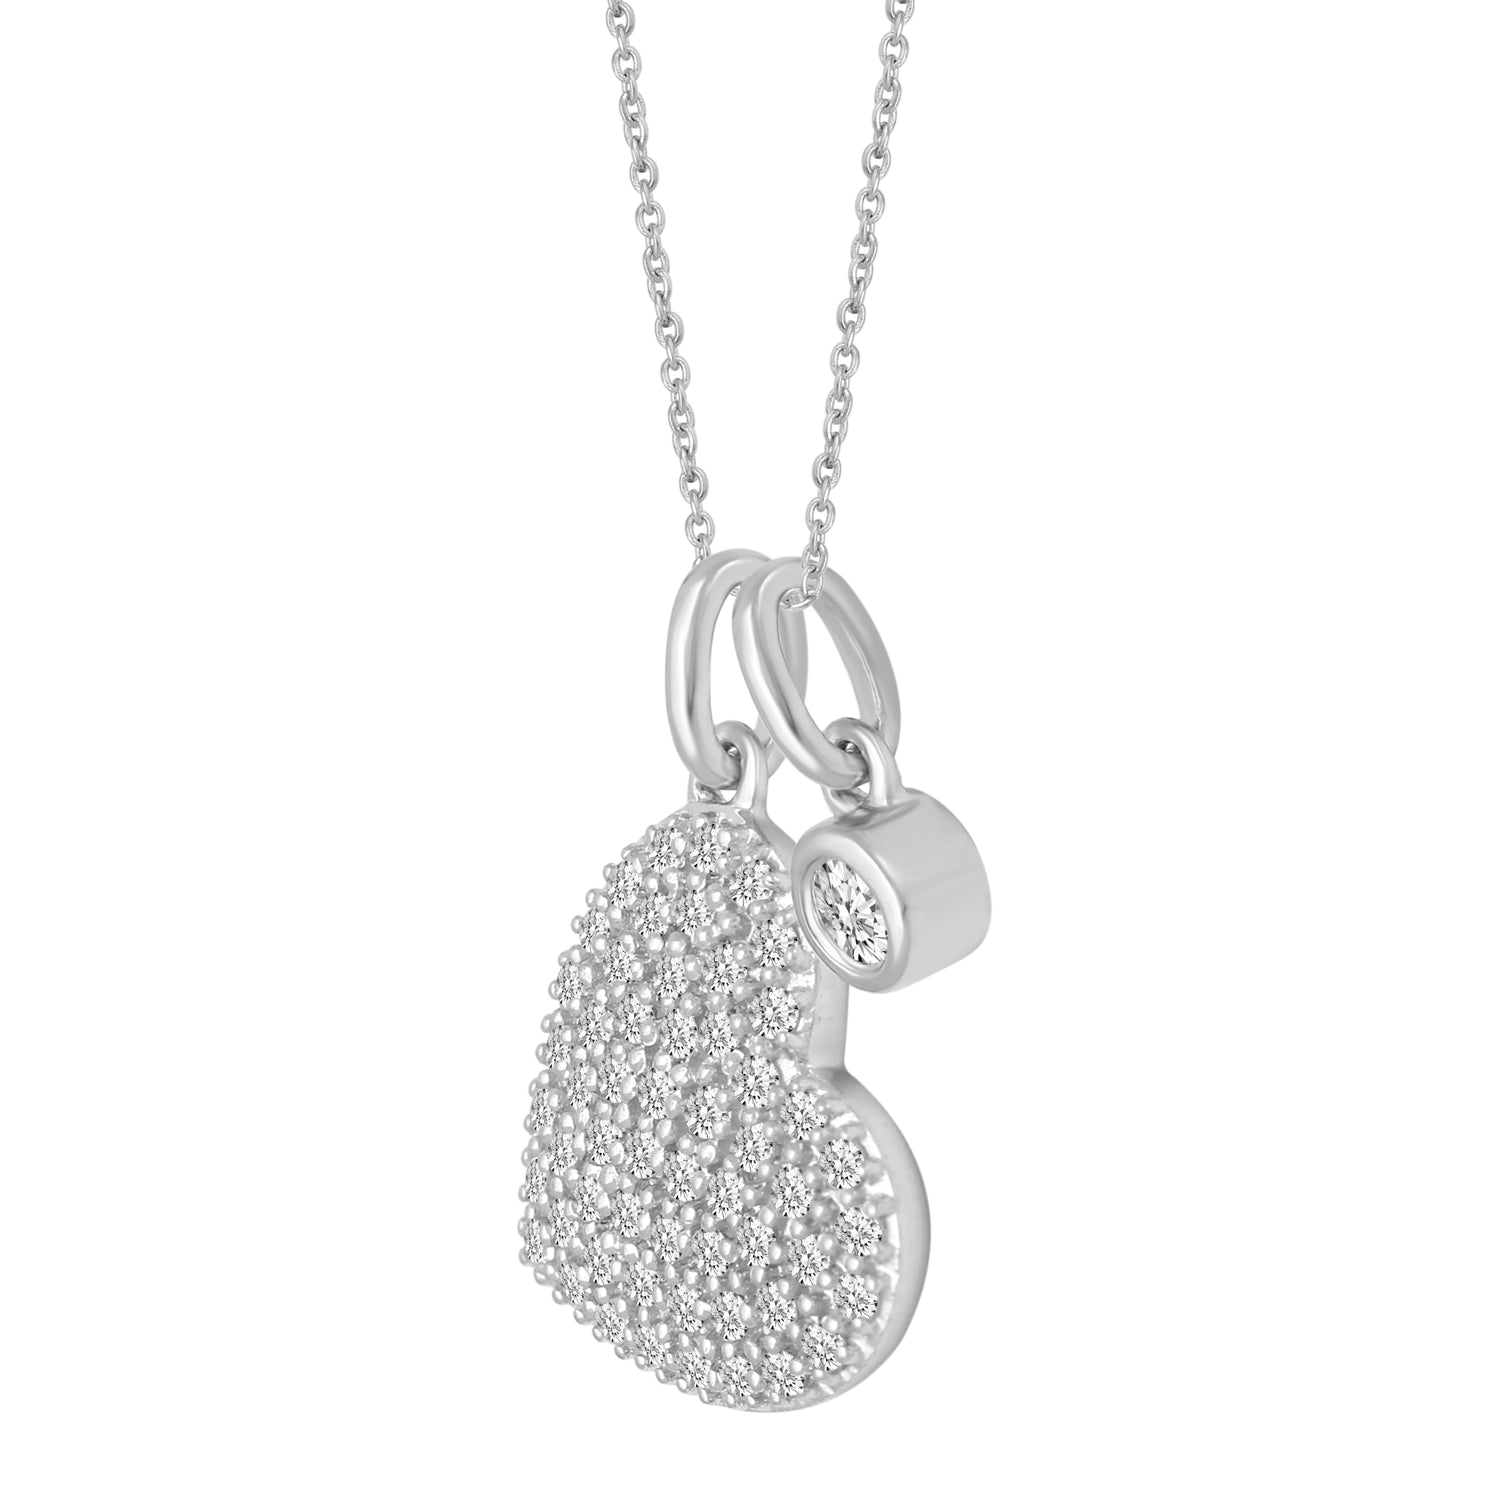 1/20 CT TW Diamond Pave Heart Floating Stone Pendant in 925 Sterling Silver